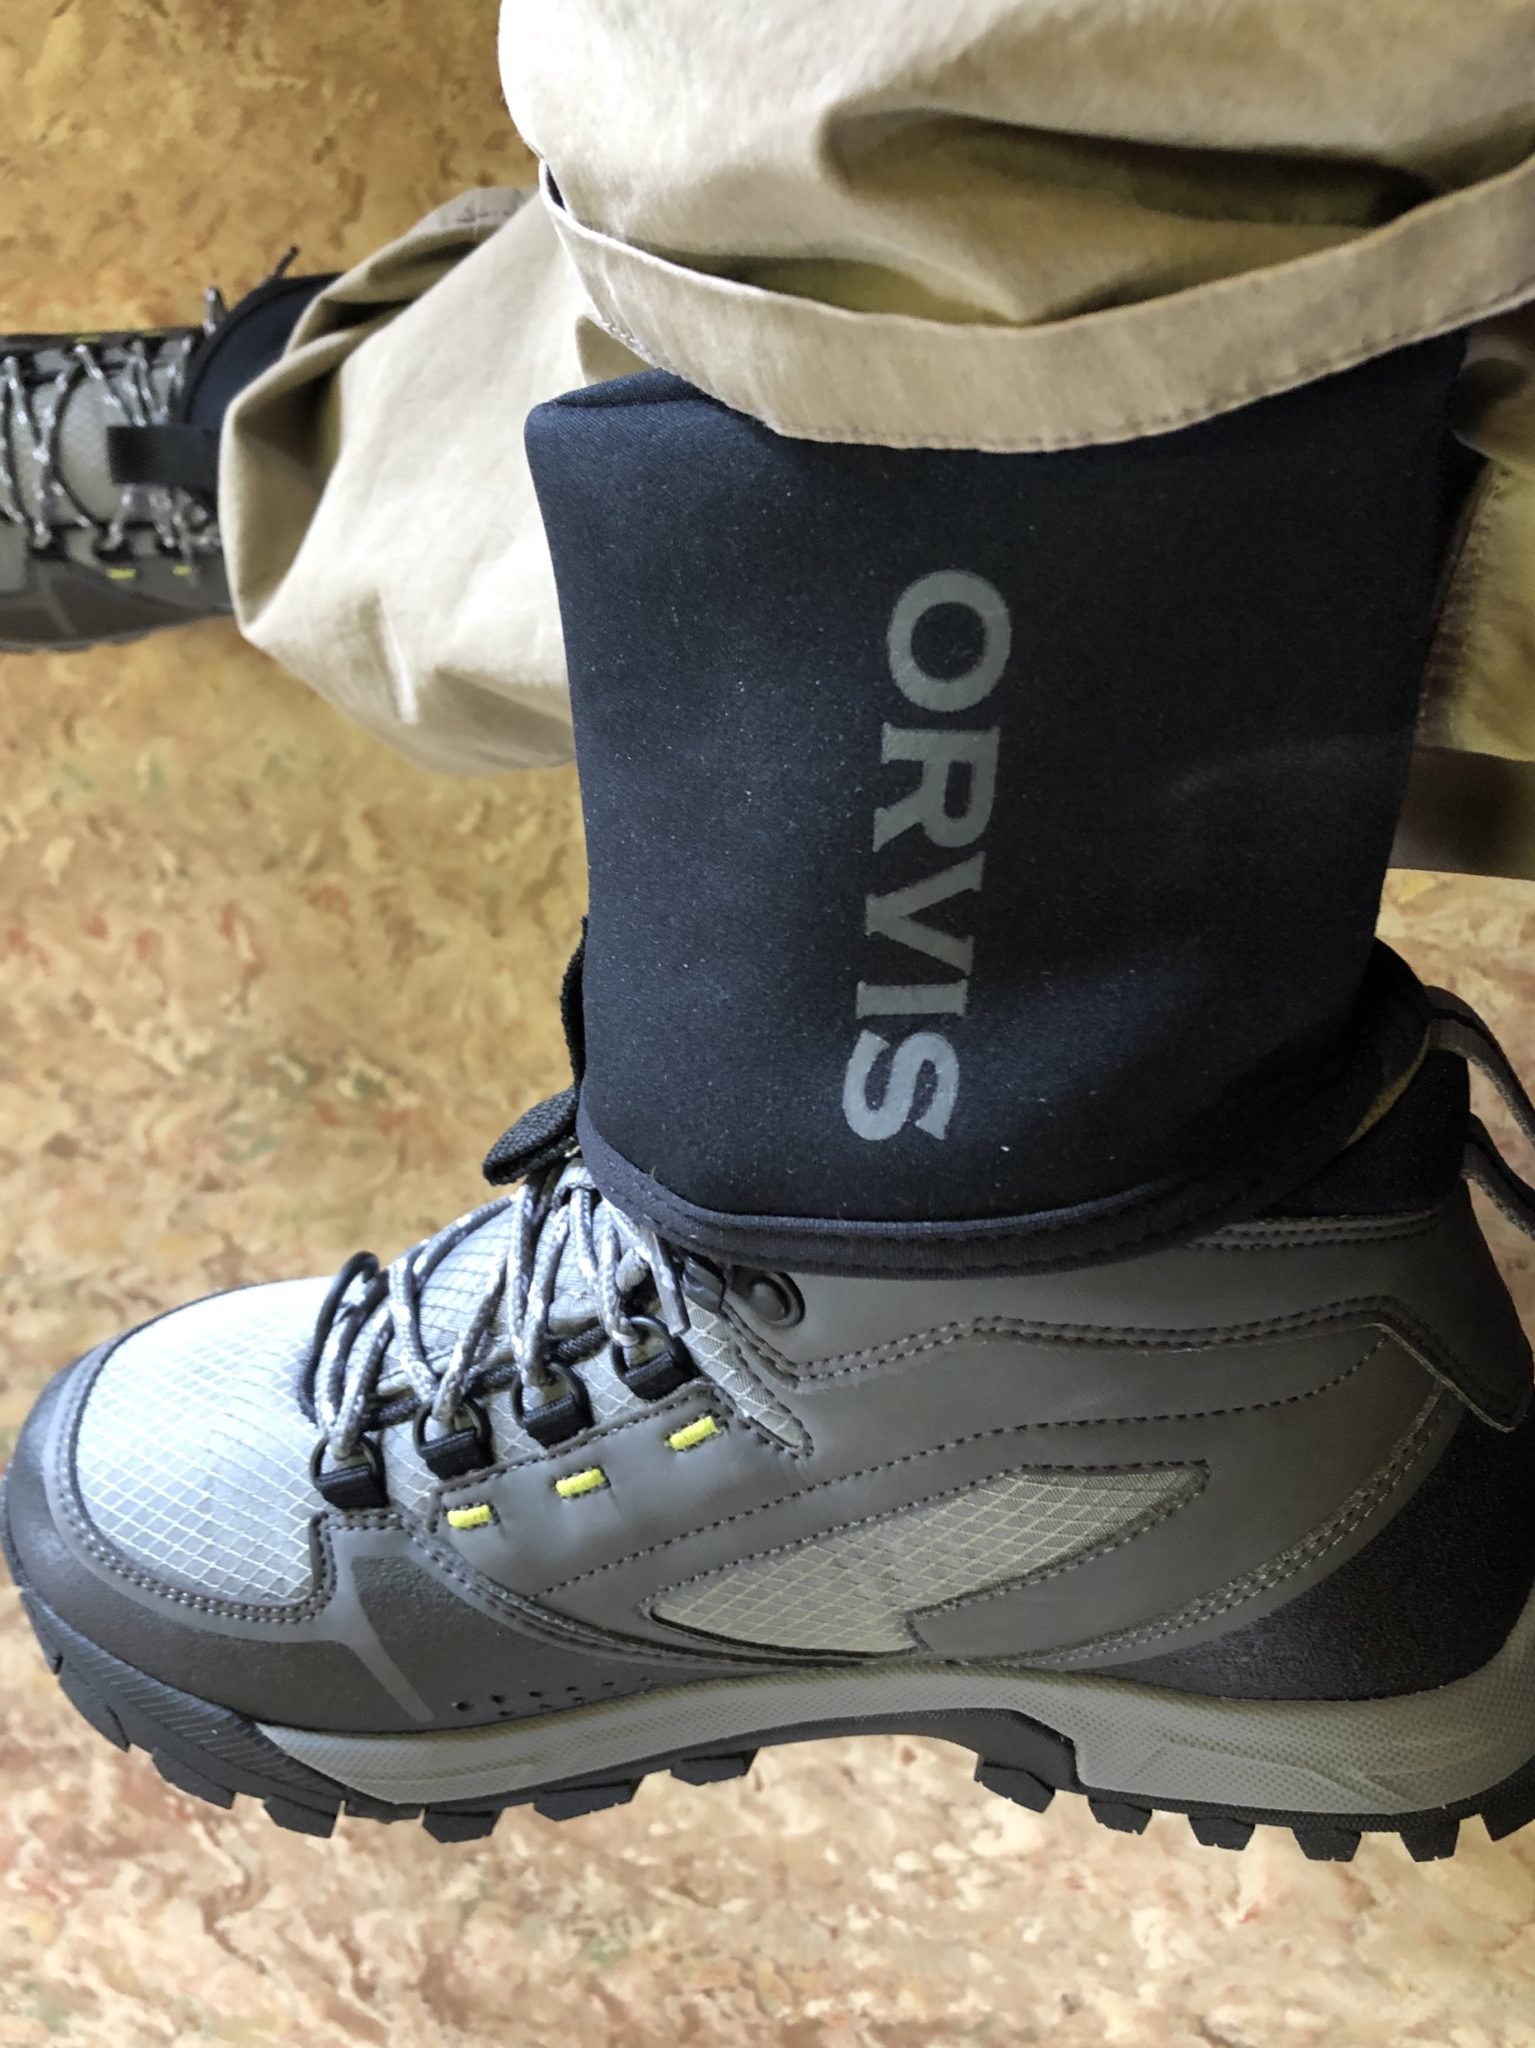 Orvis Ultralight Wading boots